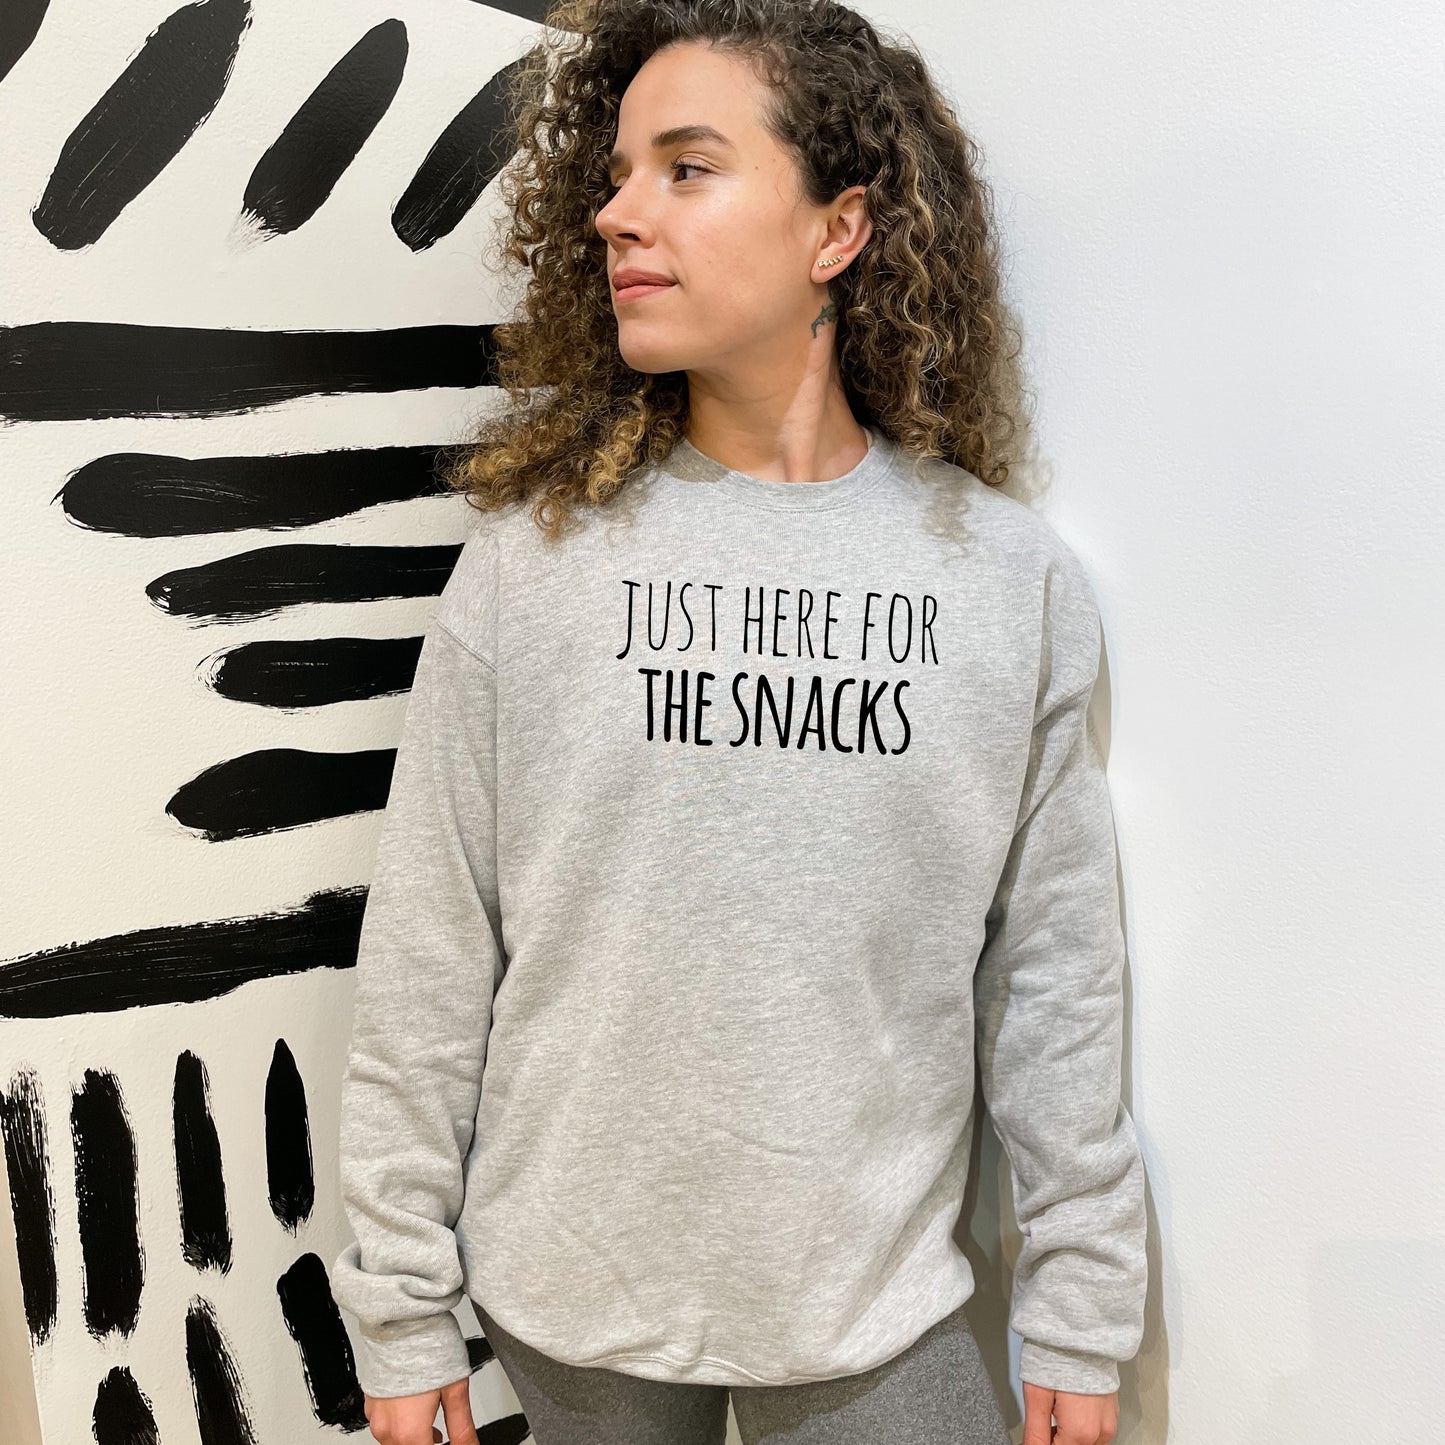 Just Here For The Snacks - Unisex Sweatshirt - Heather Gray or Dusty Blue